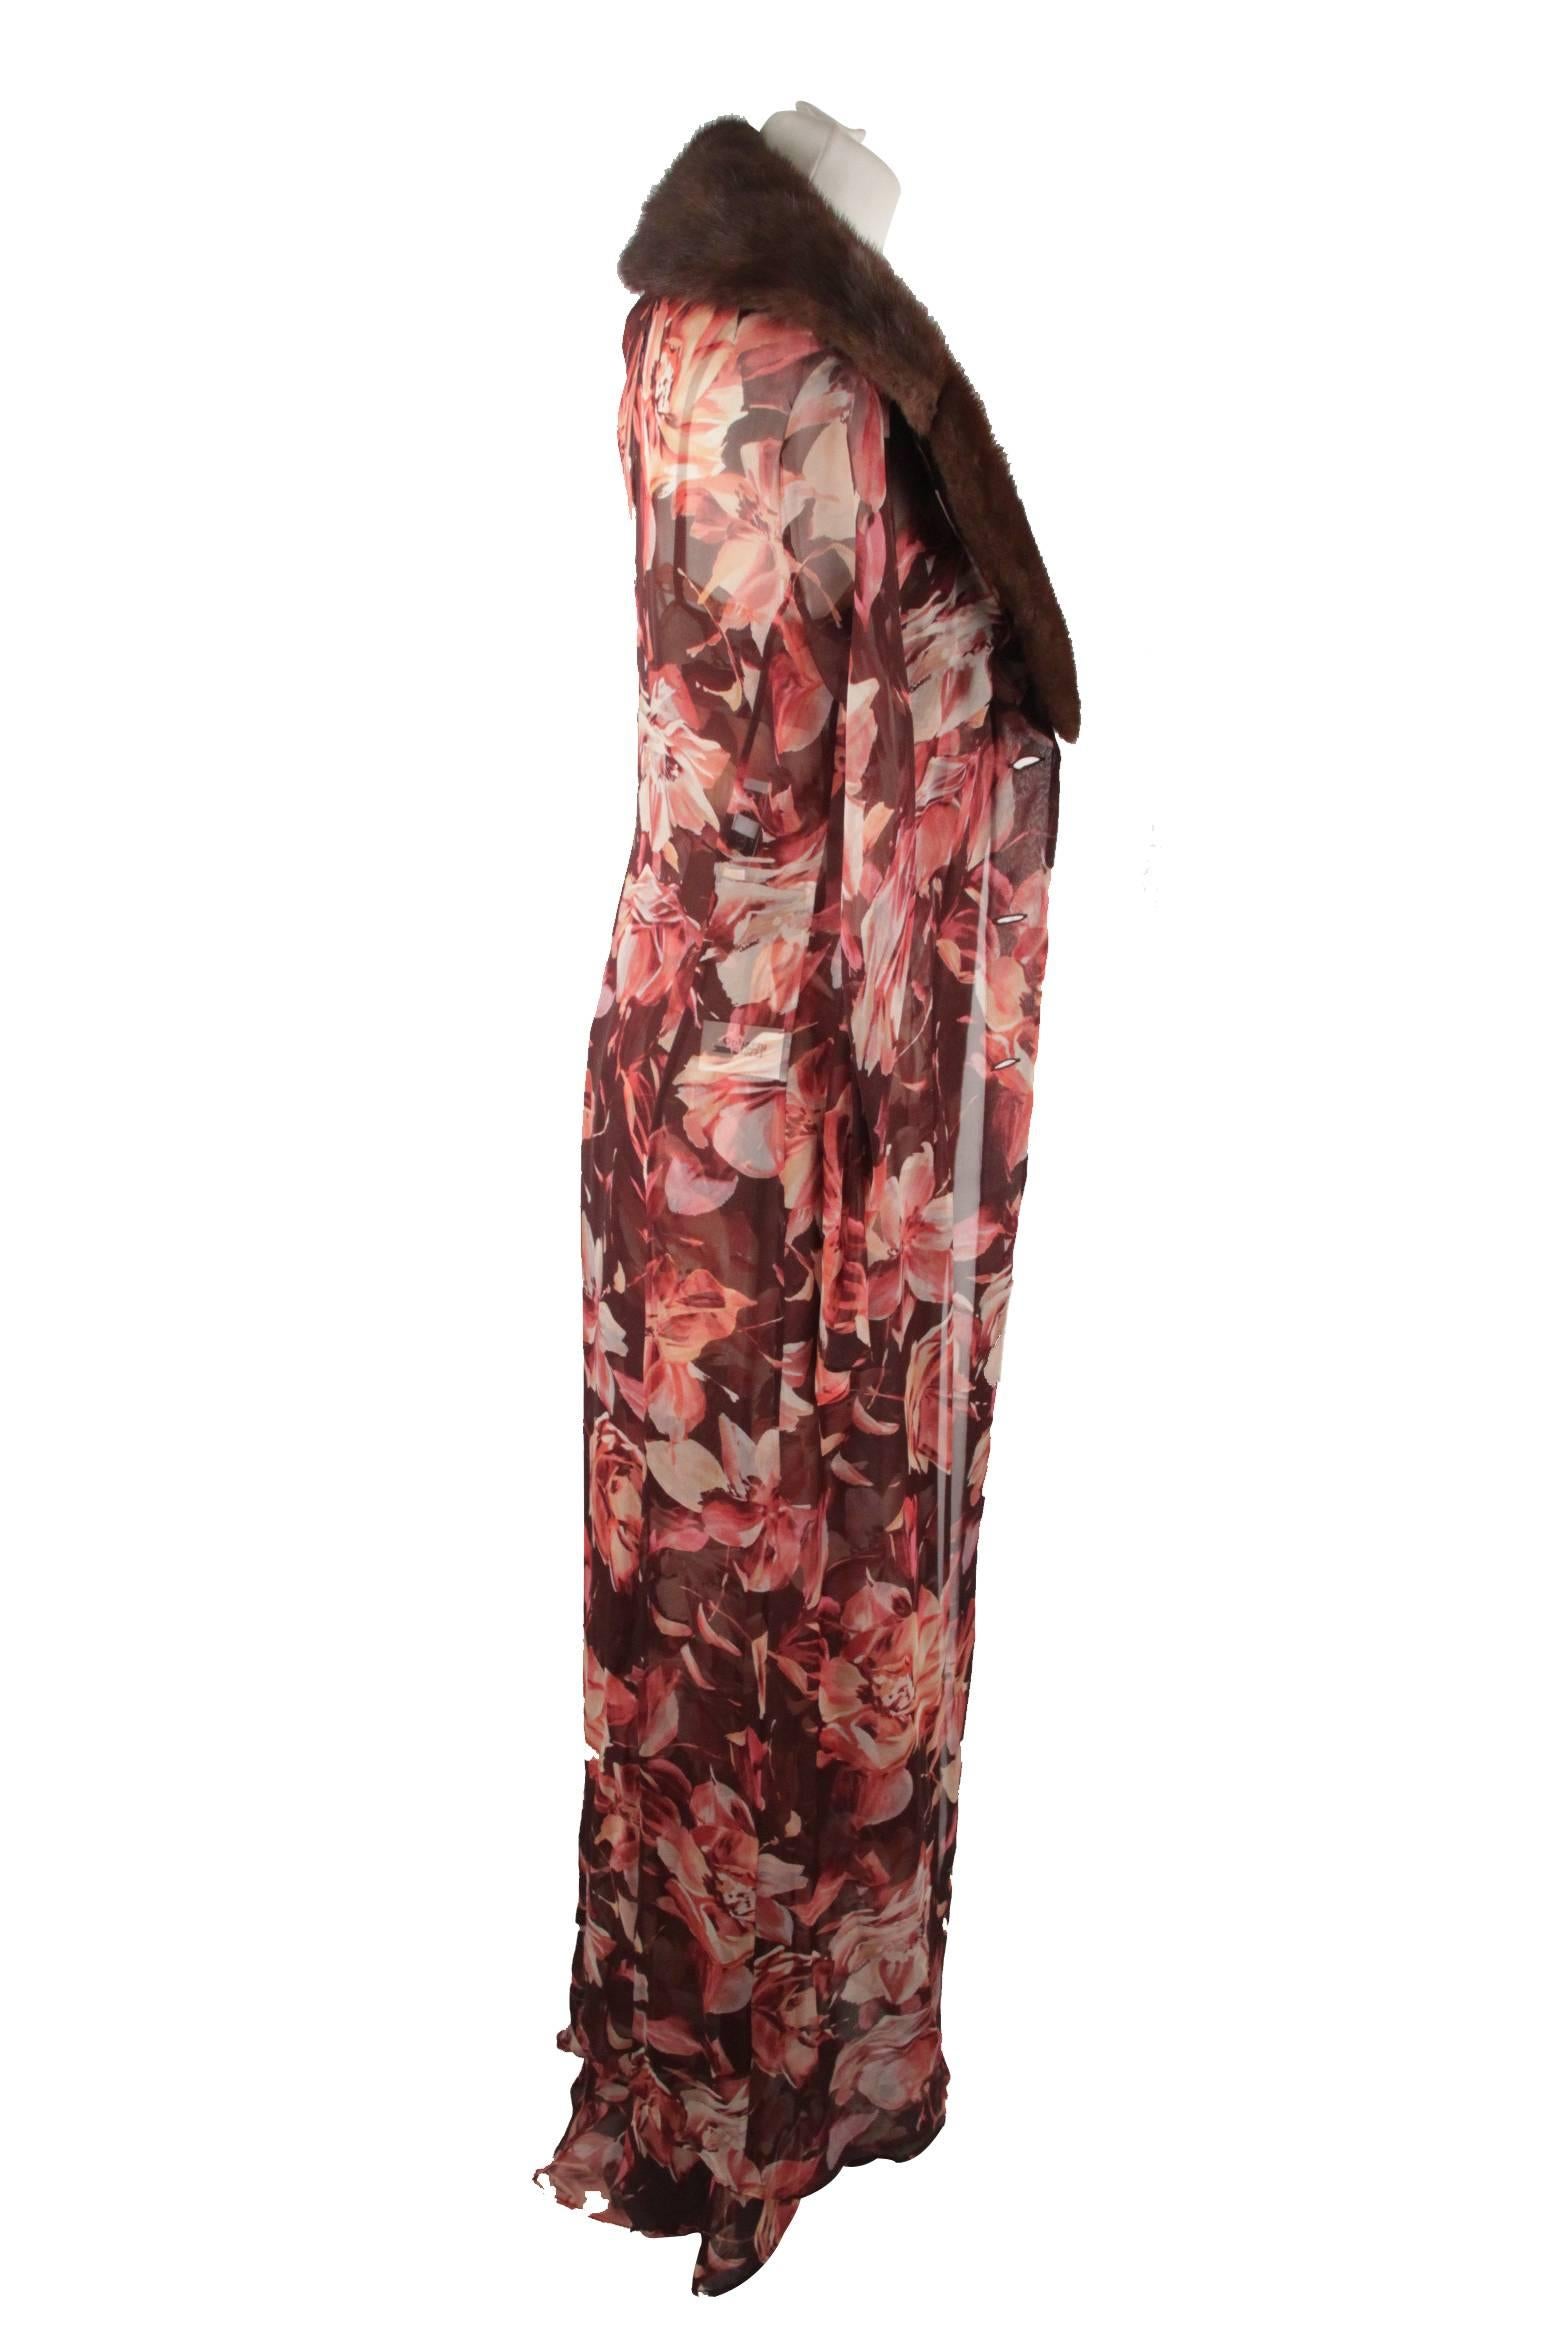 DOLCE & GABBANA Silk Floral MAXI CAMI DRESS with Matching OVERCOAT Size 42 2